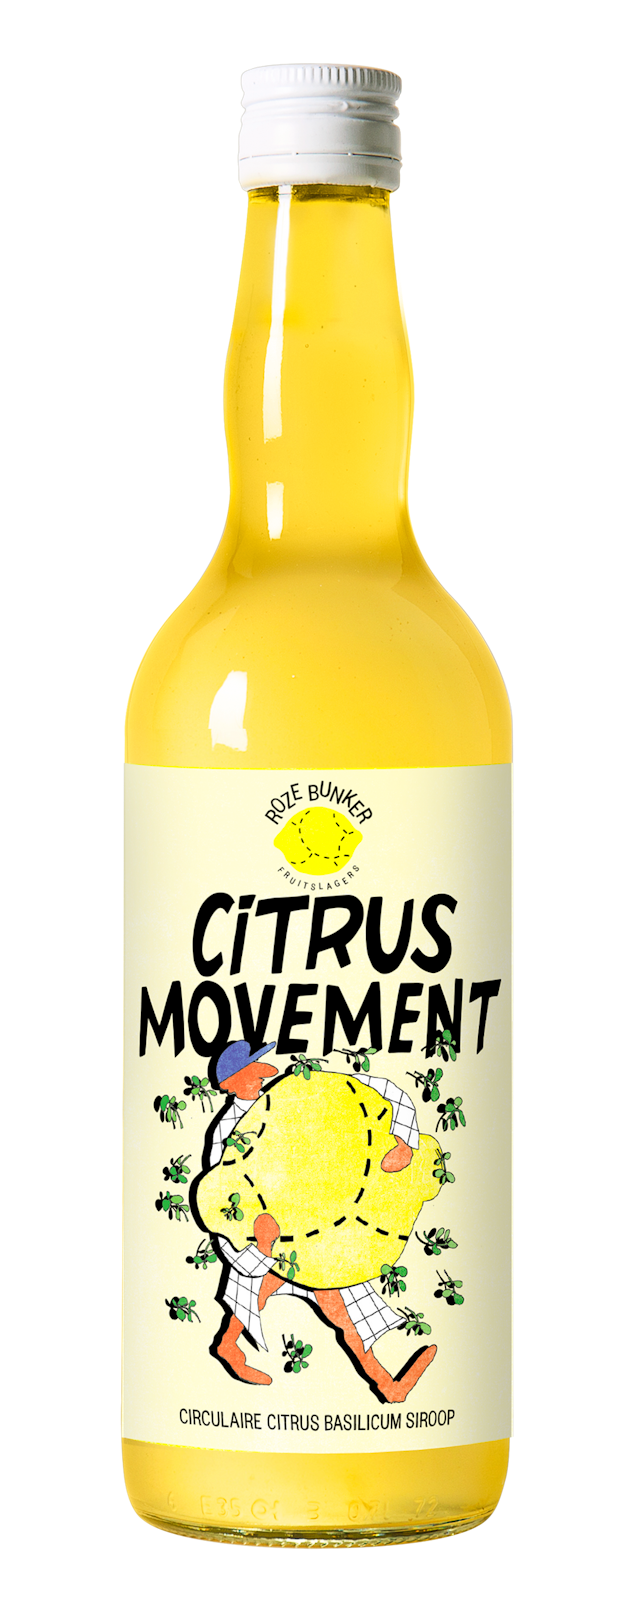 Bottle of citrus movement syrup by Roze Bunker